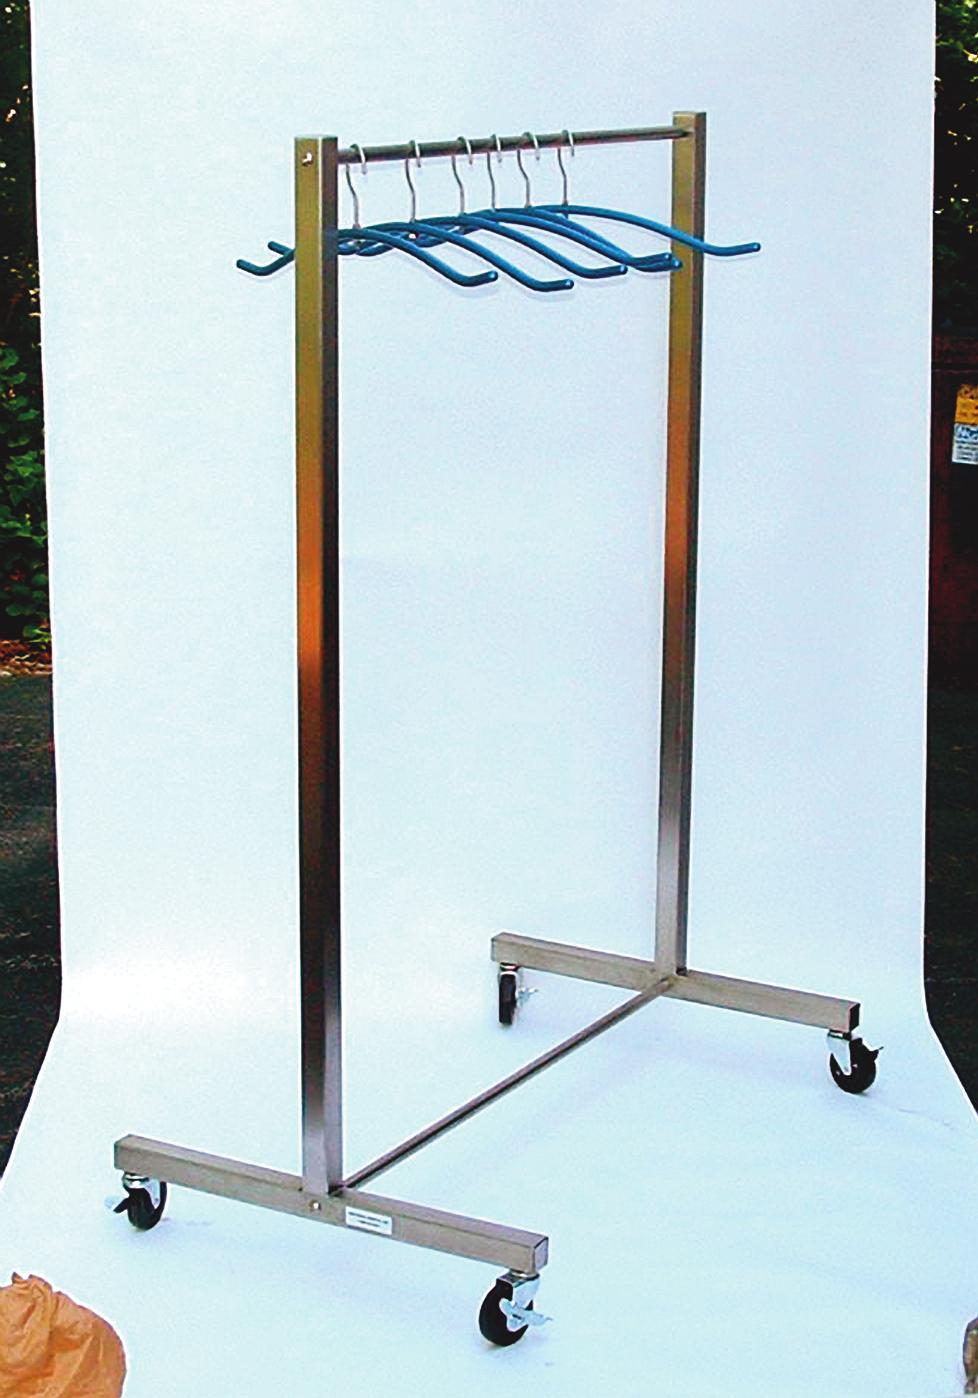 Apron Racks Roll-Away Designed with sturdy casters for easy storage and mobility.